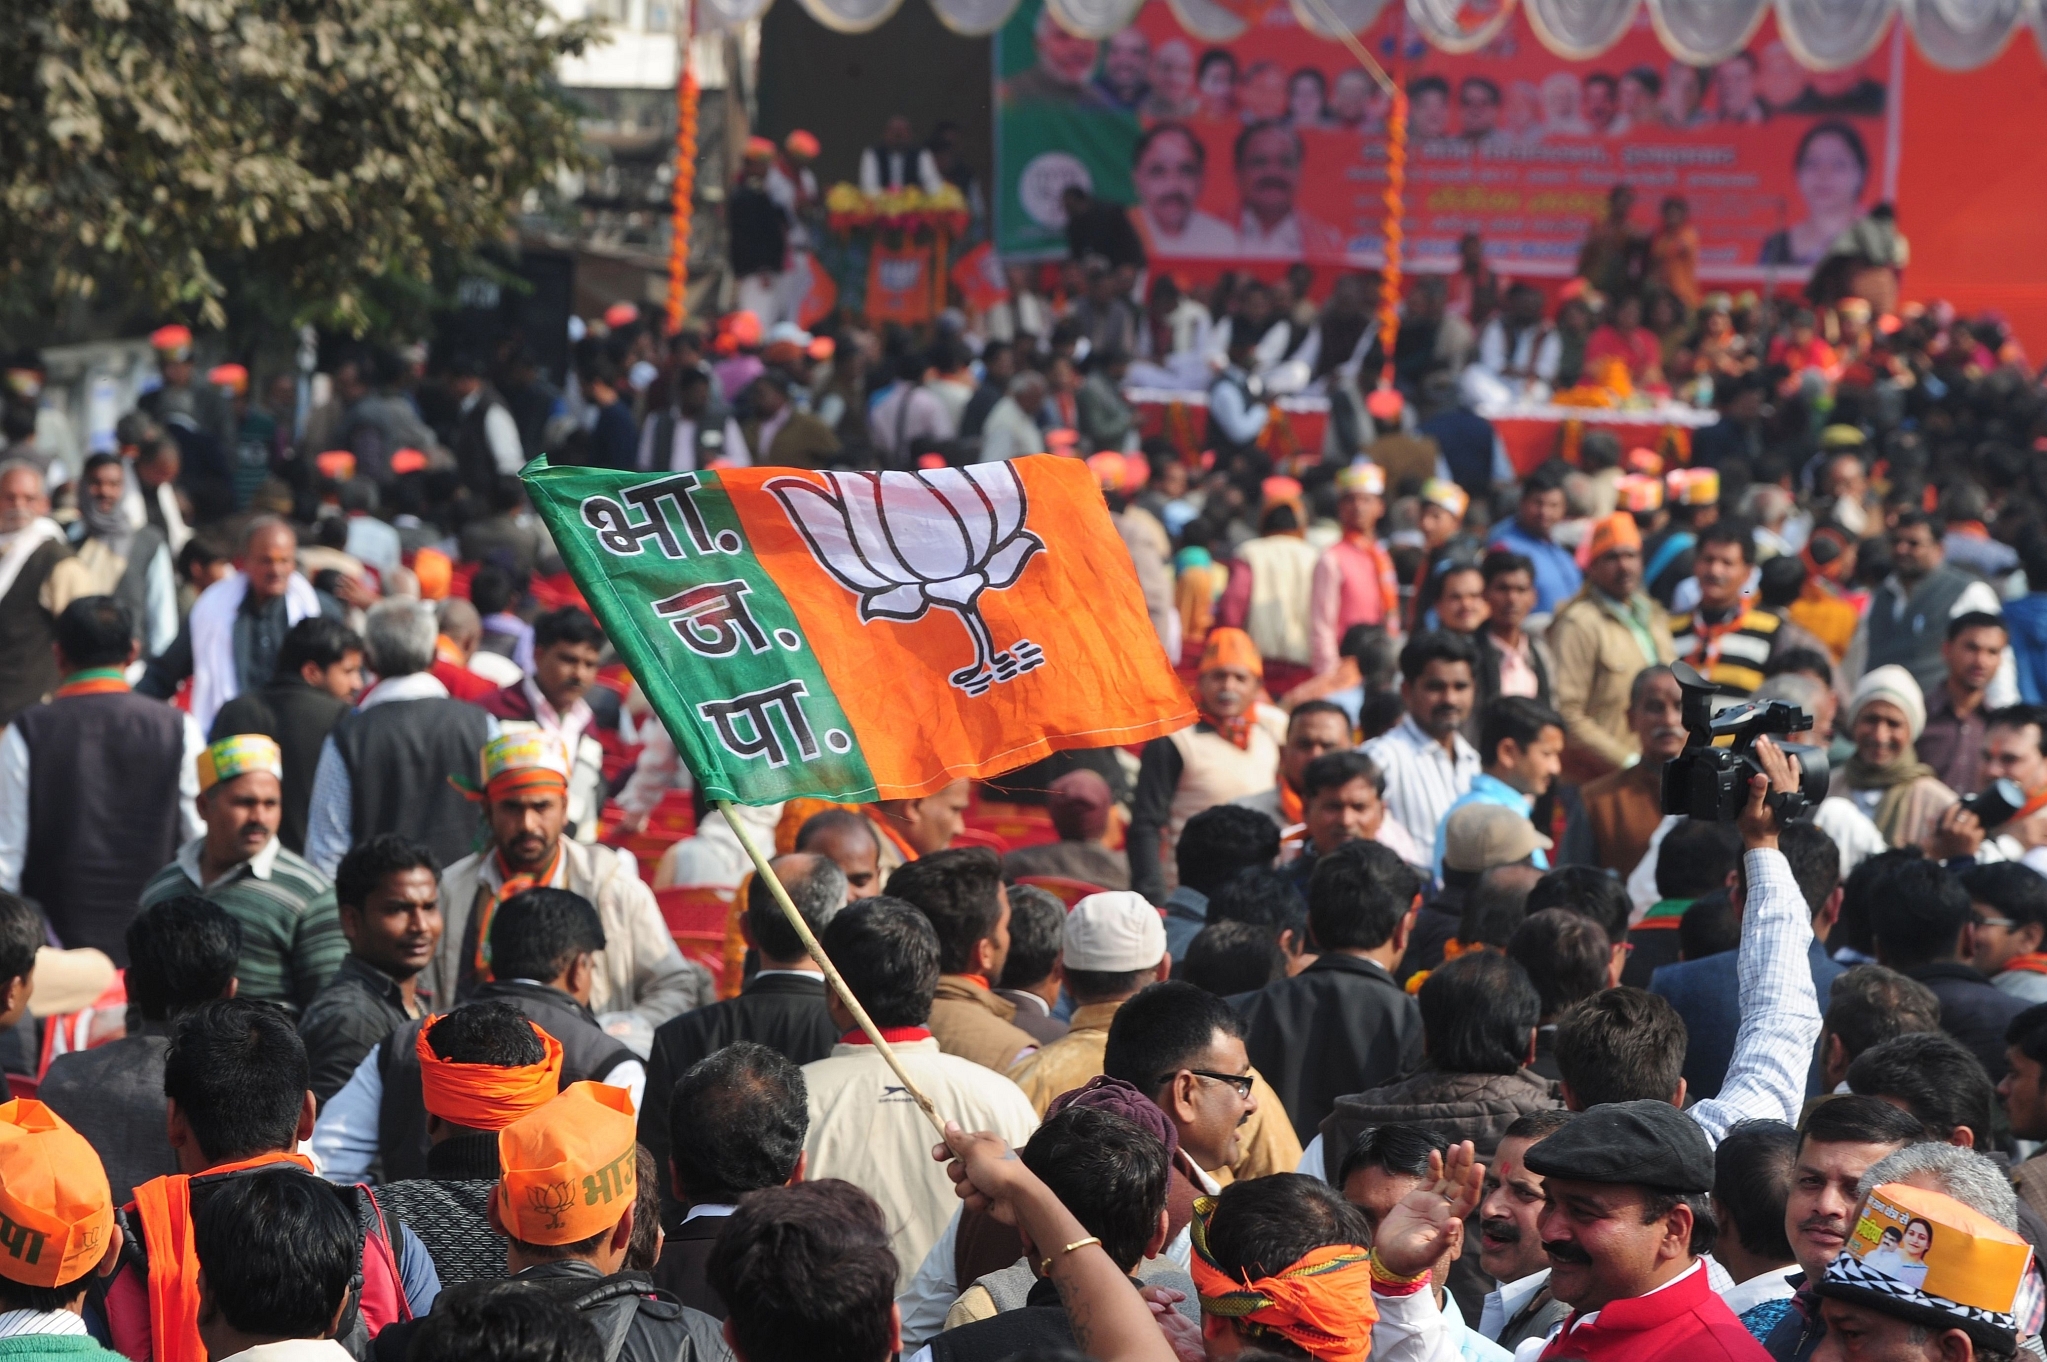  BJP supporters at a rally. (Photo credit: SANJAY KANOJIA/AFP/Getty Images)